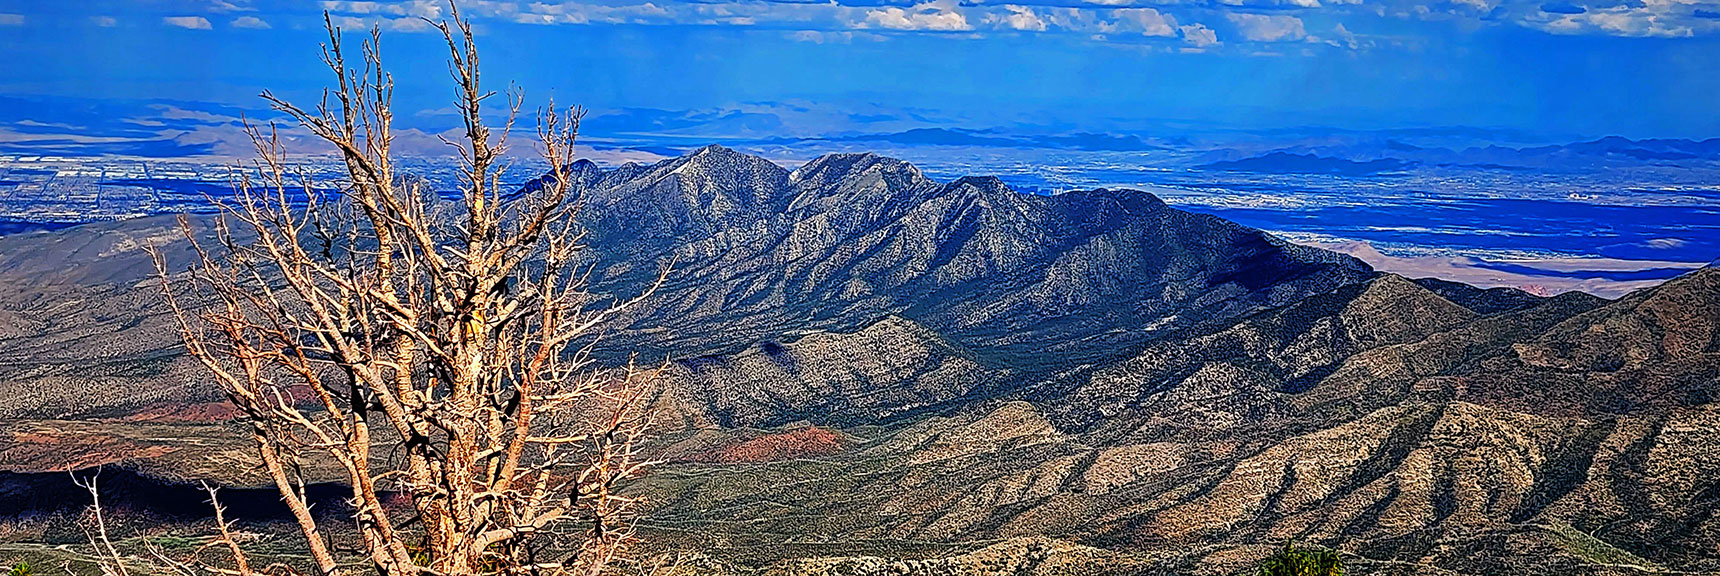 Higher View of La Madre Mts. Las Vegas Valley Background. | Harris Mountain Triangle | Mt Charleston Wilderness, Nevada